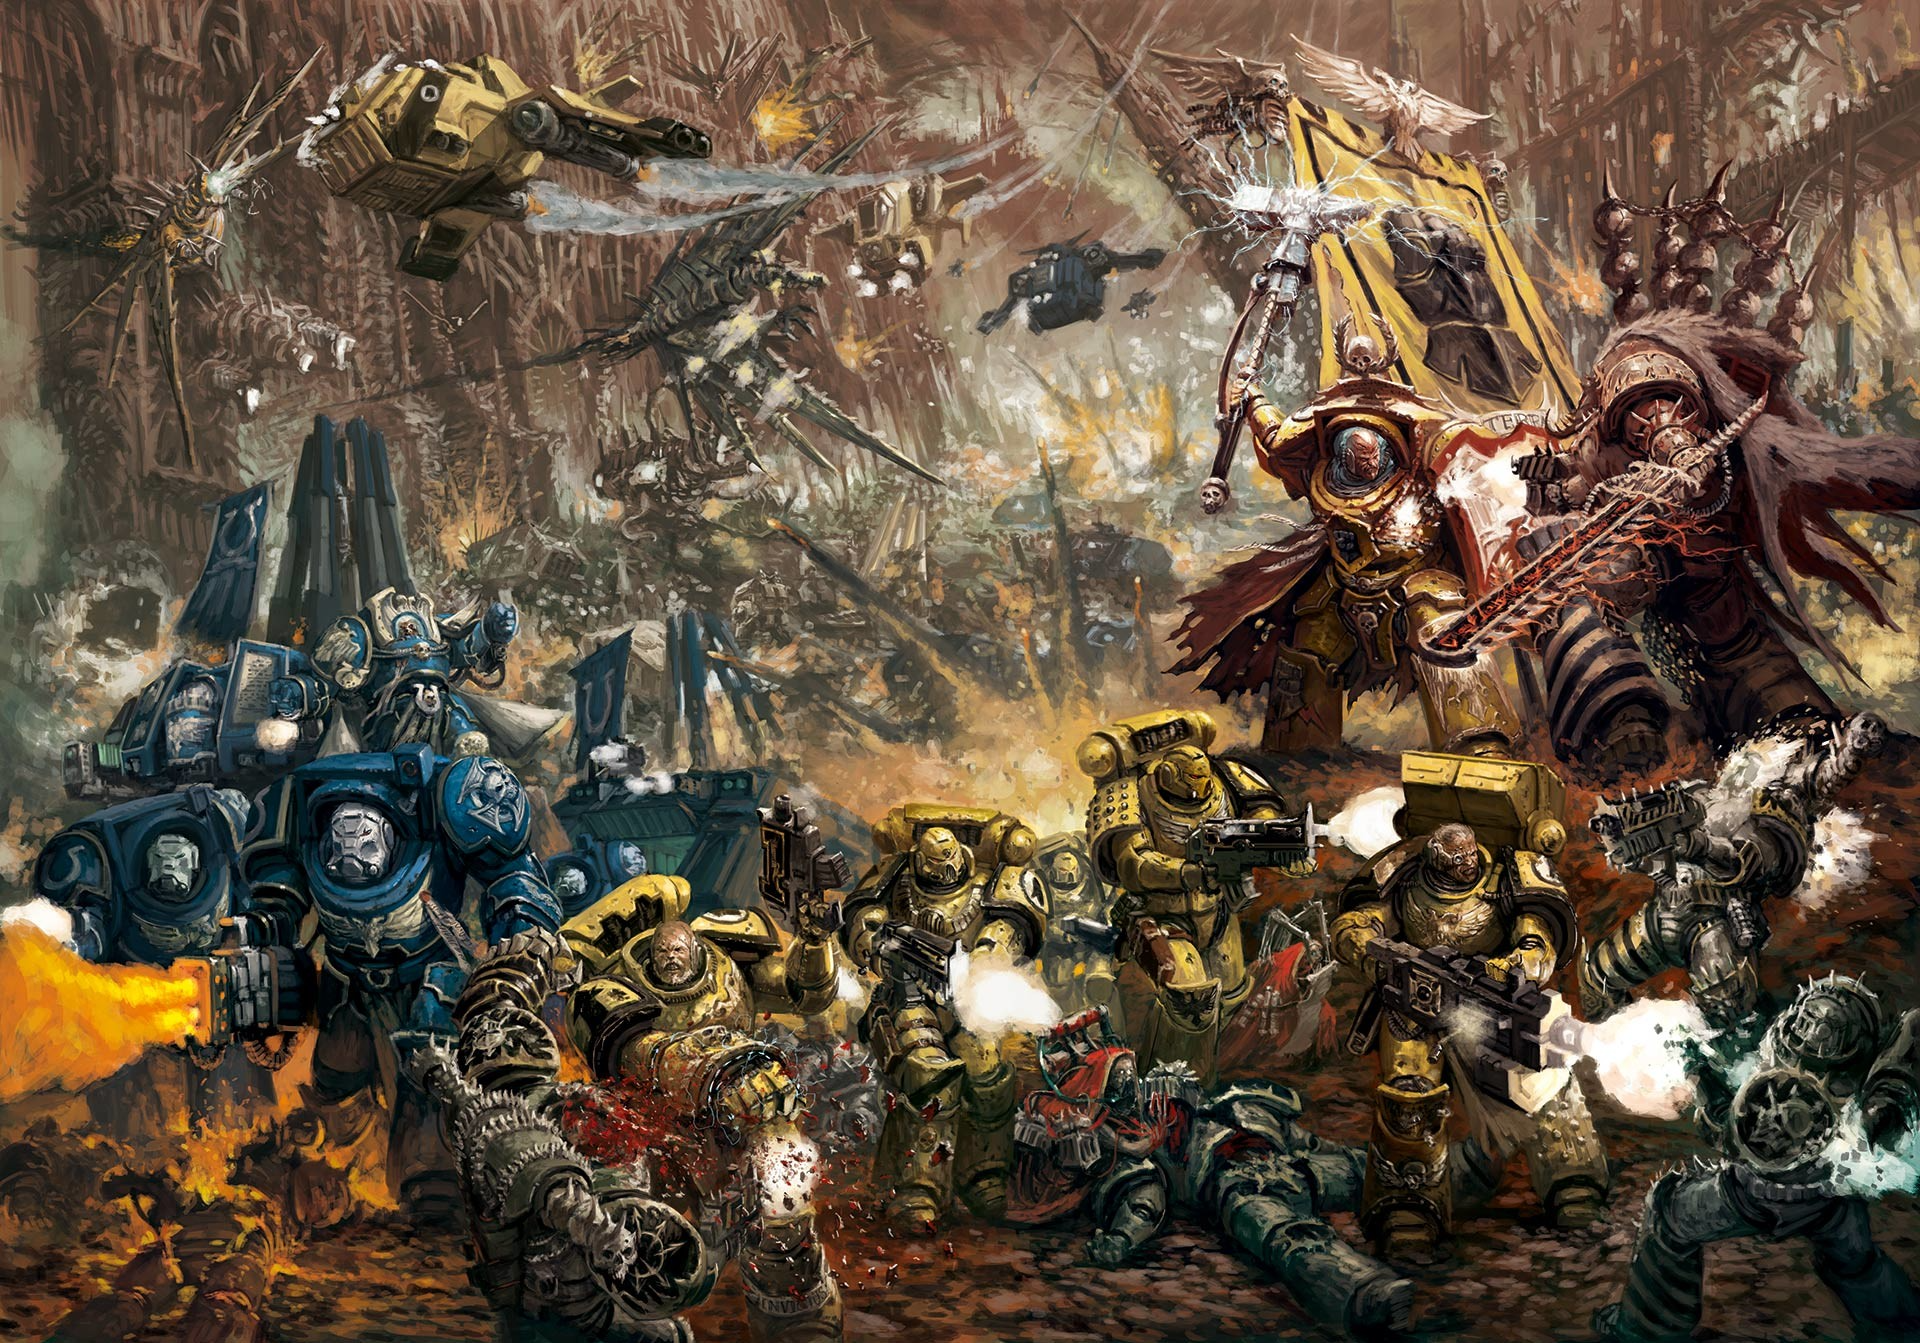 General 1920x1343 Warhammer Warhammer 40,000 Warhammer 30,000 power armor space marines science fiction gun bolter Ultramarines Imperial Fists Chaos Space Marine deamons video games video game art armor